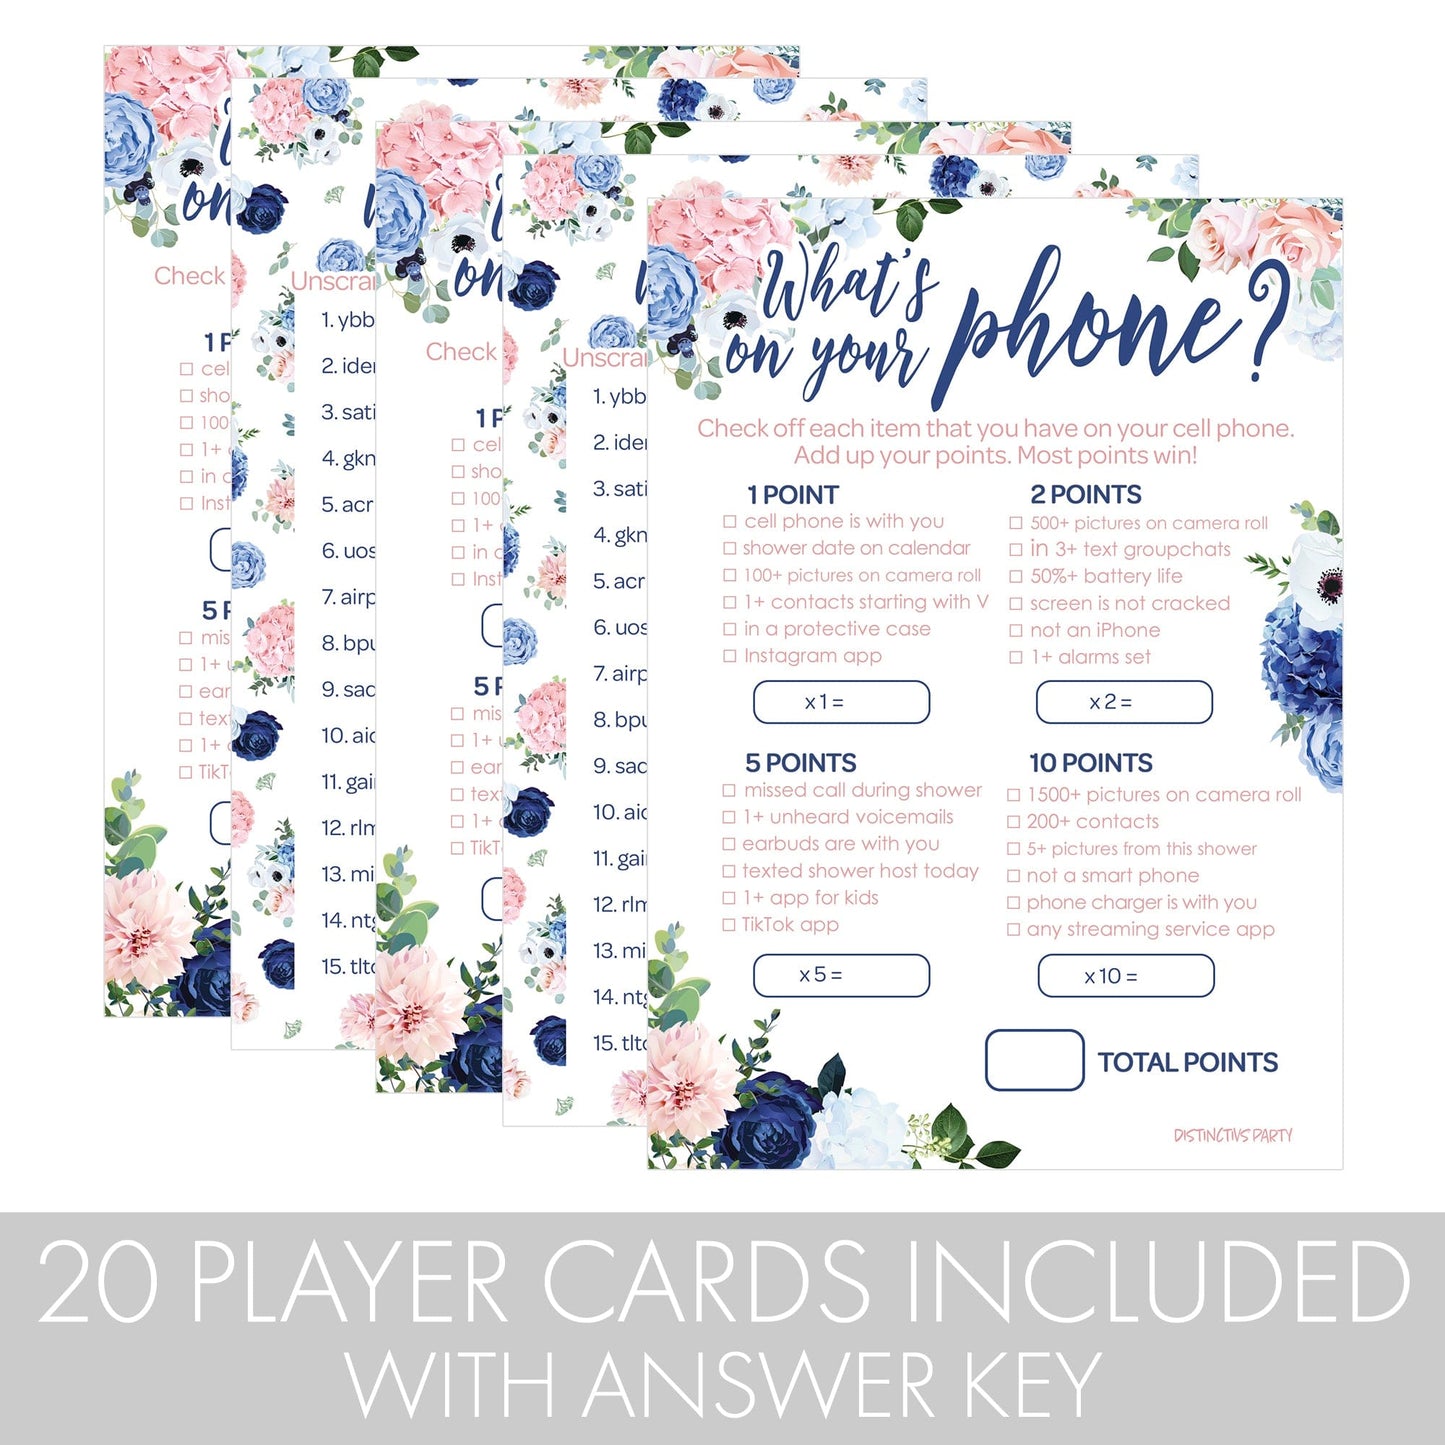 20 player pink and blue party activities including answer key for guests